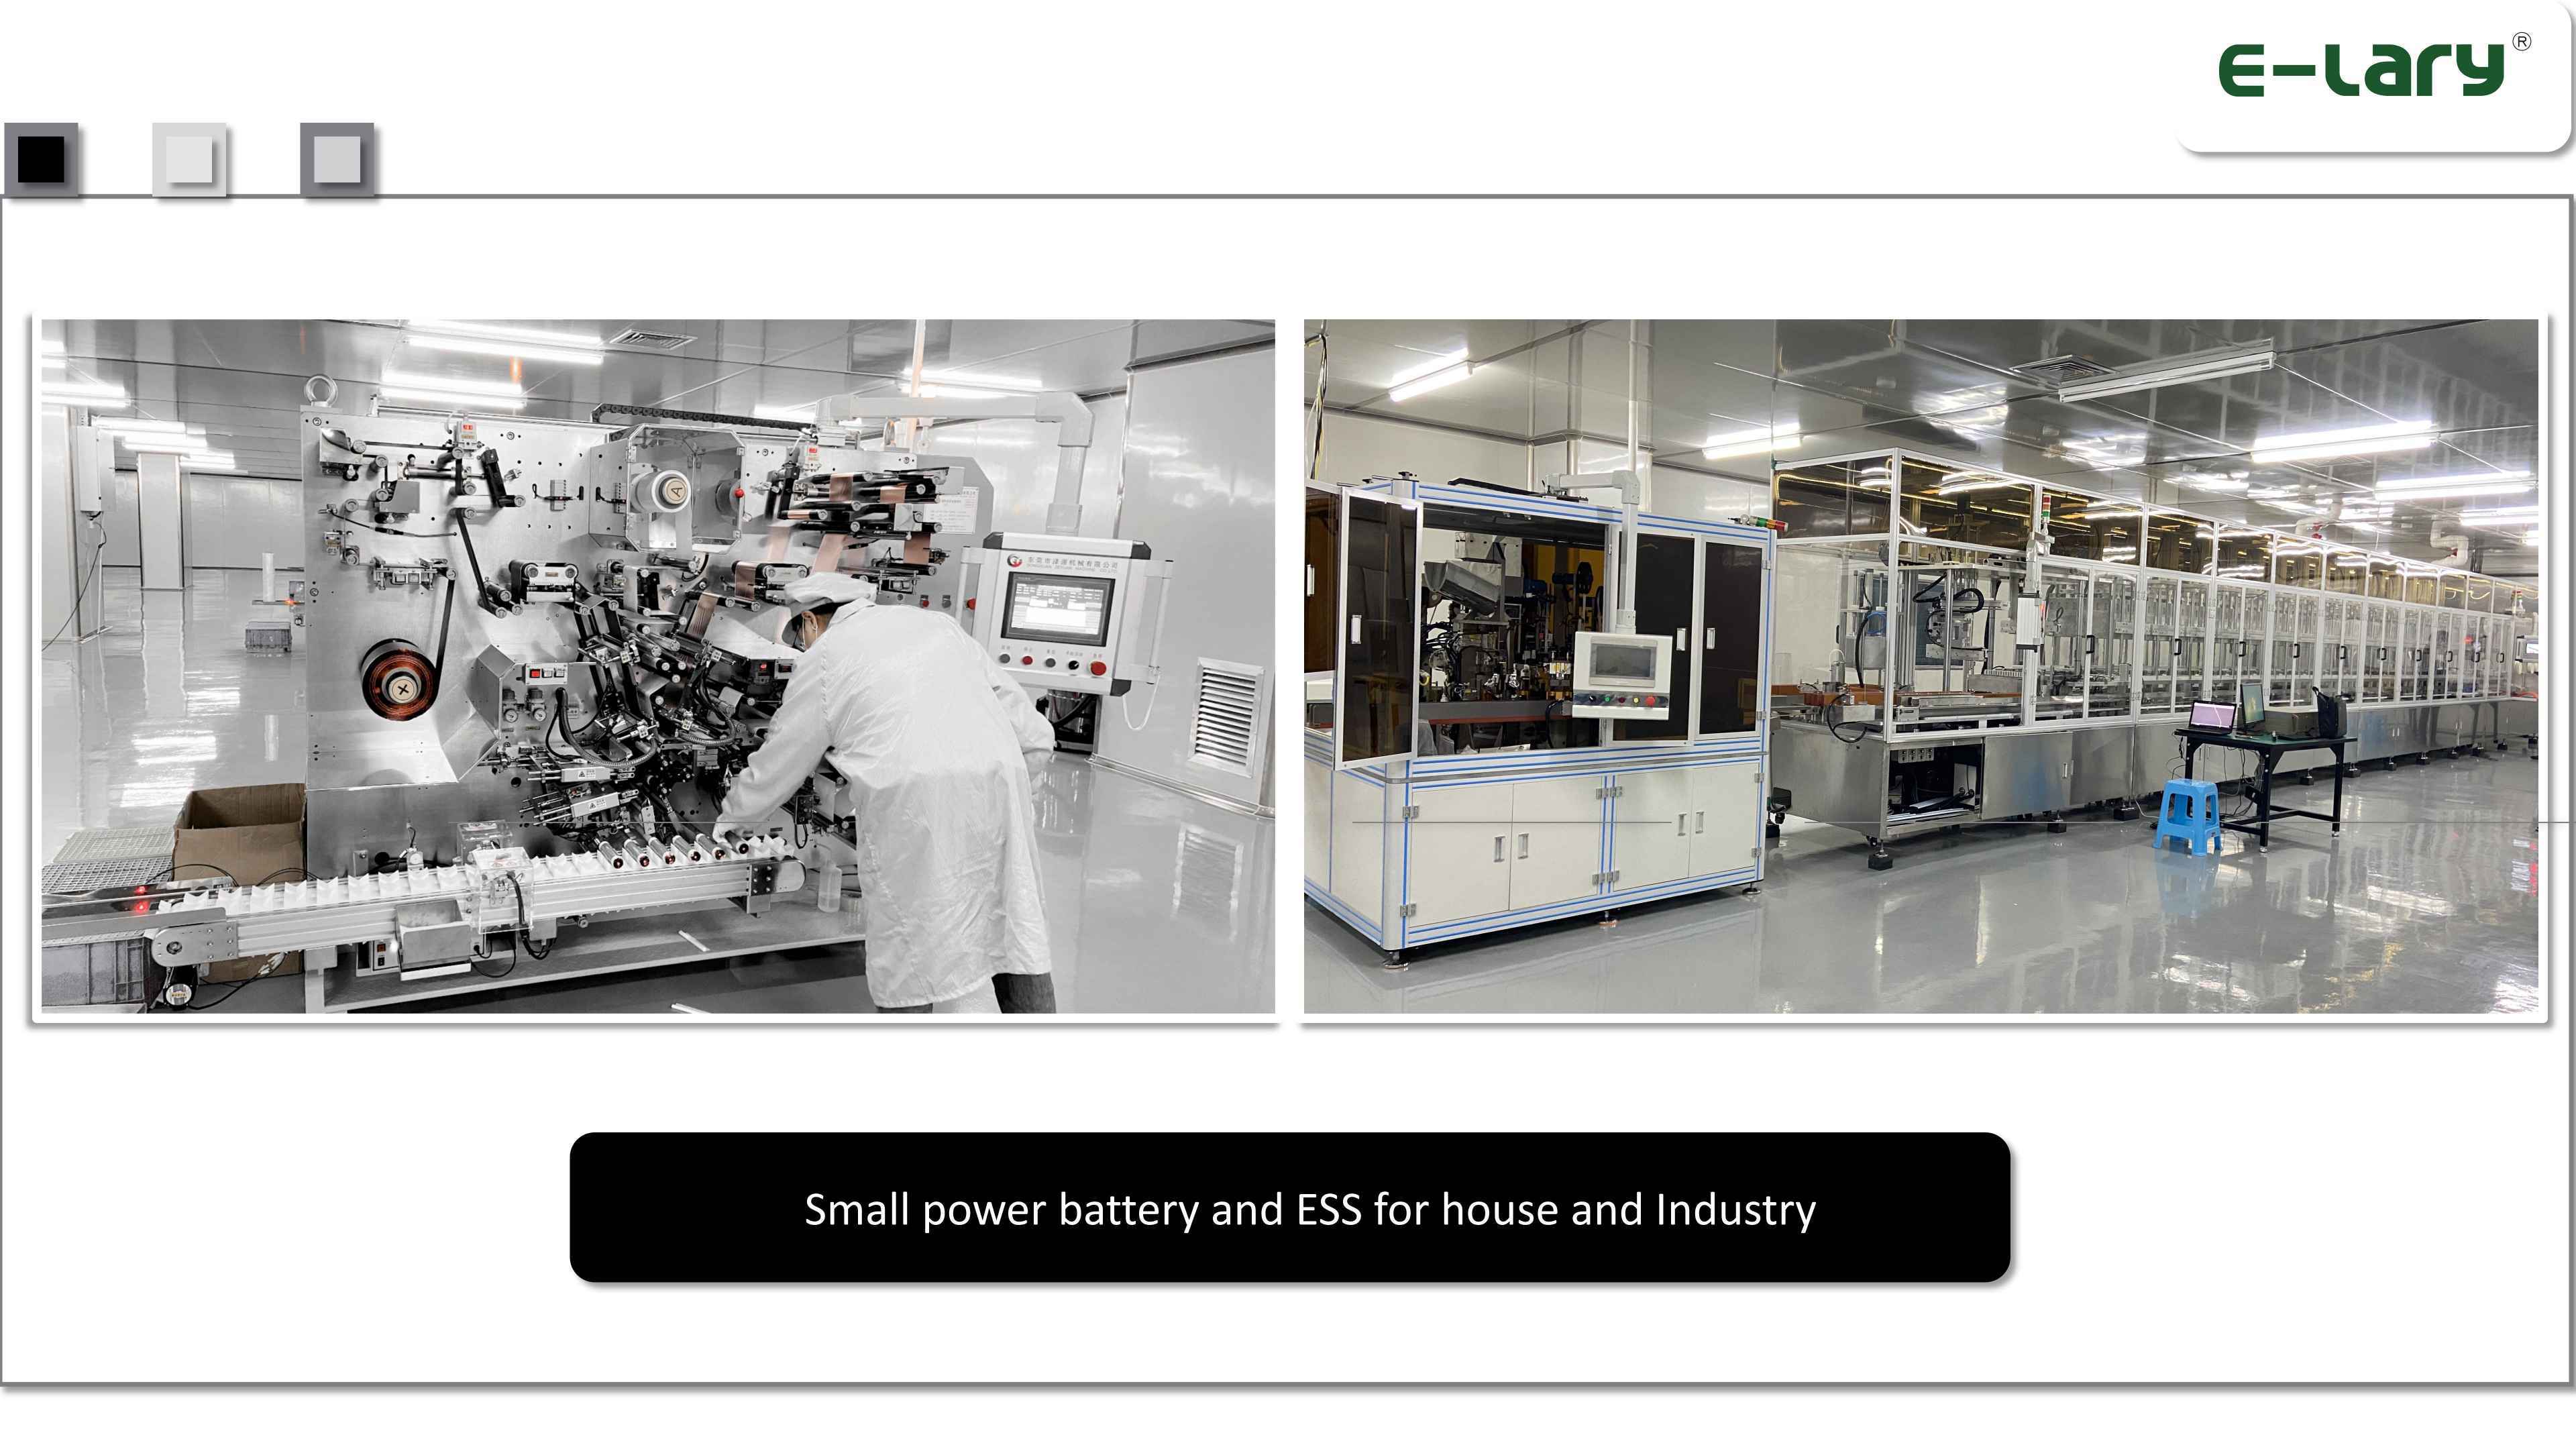 E-lary Company Profile Of Sodium Batteries For Electric Vehicles